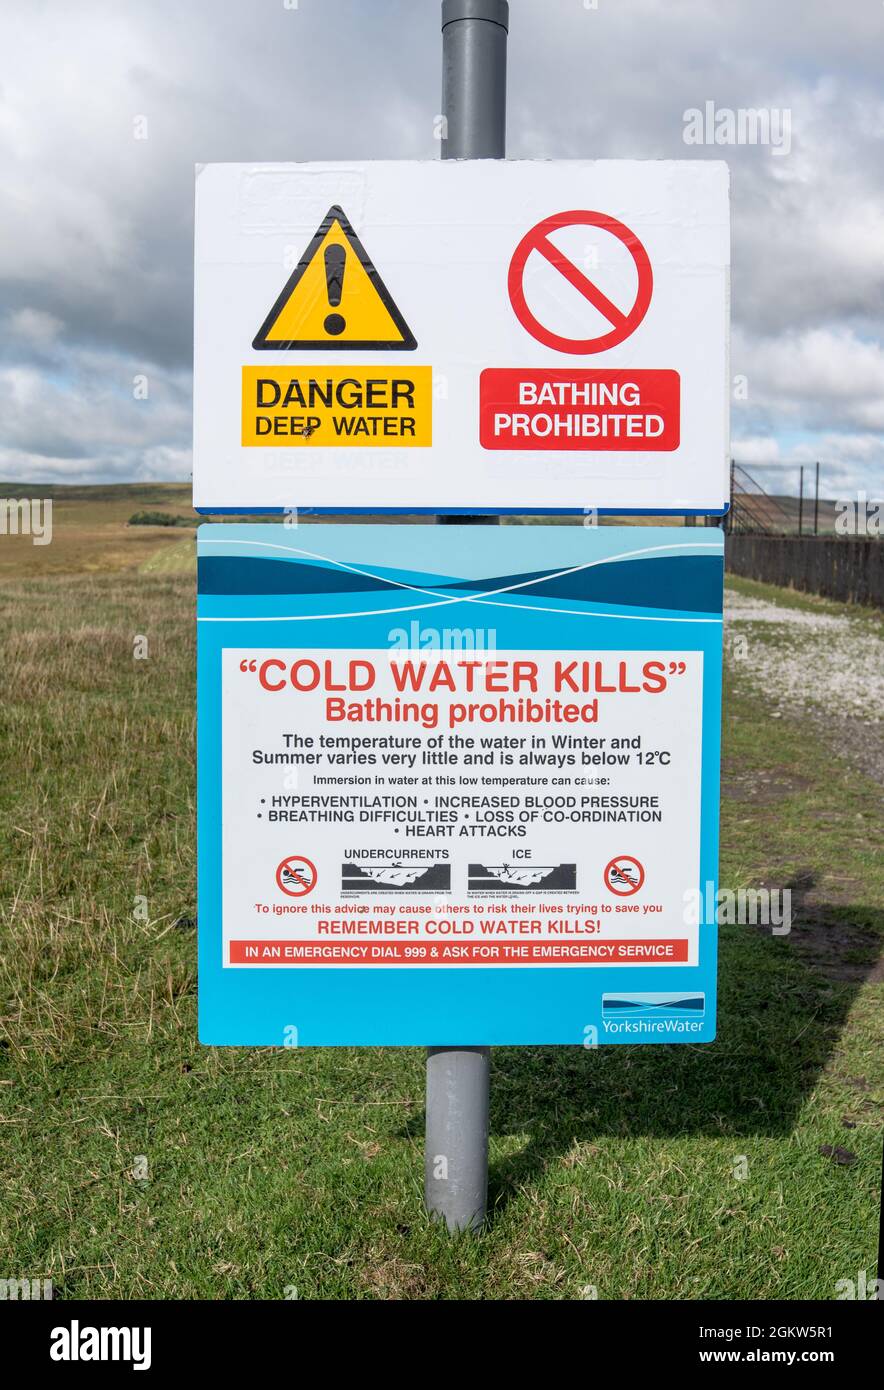 https://c8.alamy.com/comp/2GKW5R1/cold-water-kills-advice-notice-at-grimwith-reservoir-near-grassington-in-the-yorkshire-dales-2GKW5R1.jpg